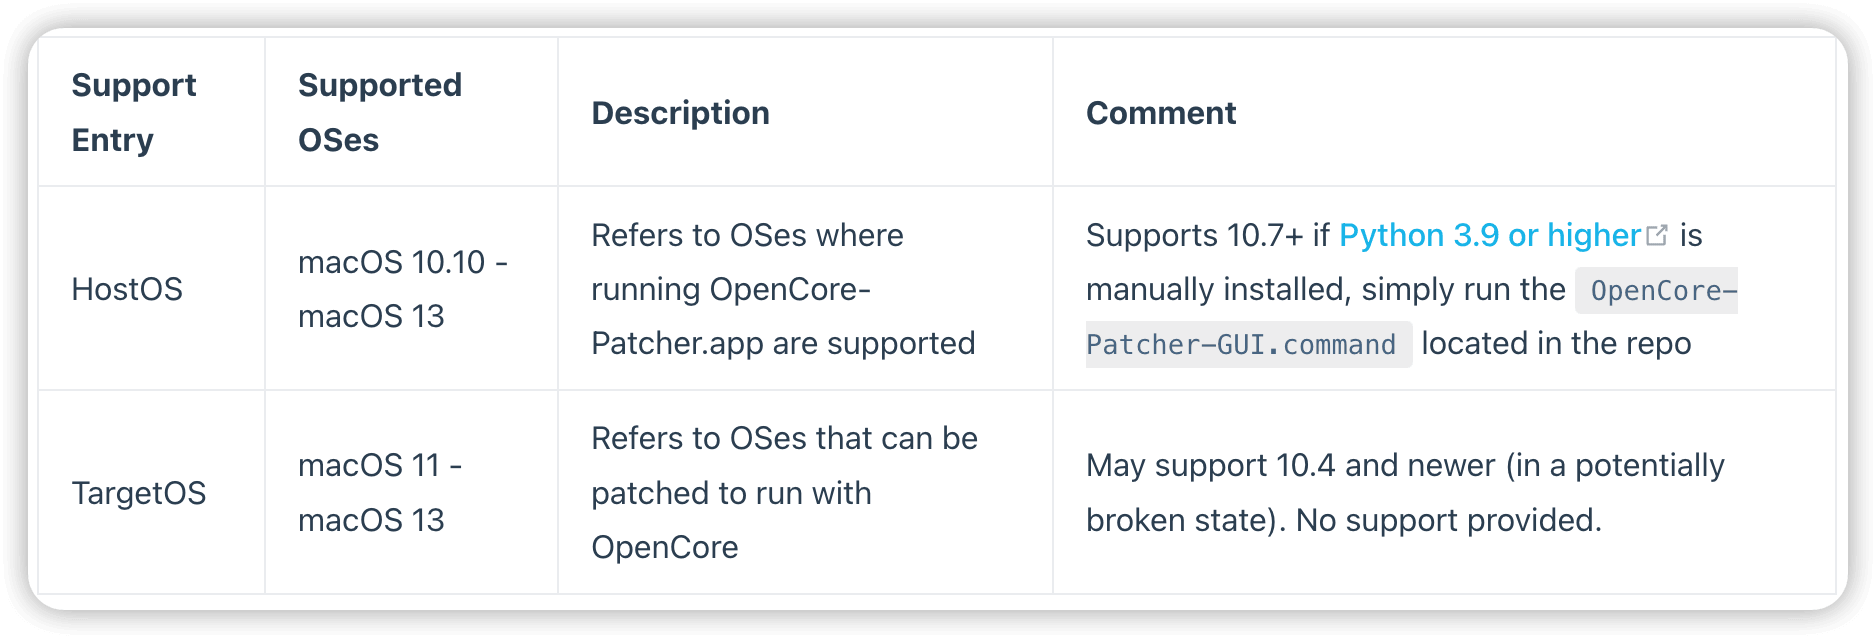 OpenCore Supported macOSes